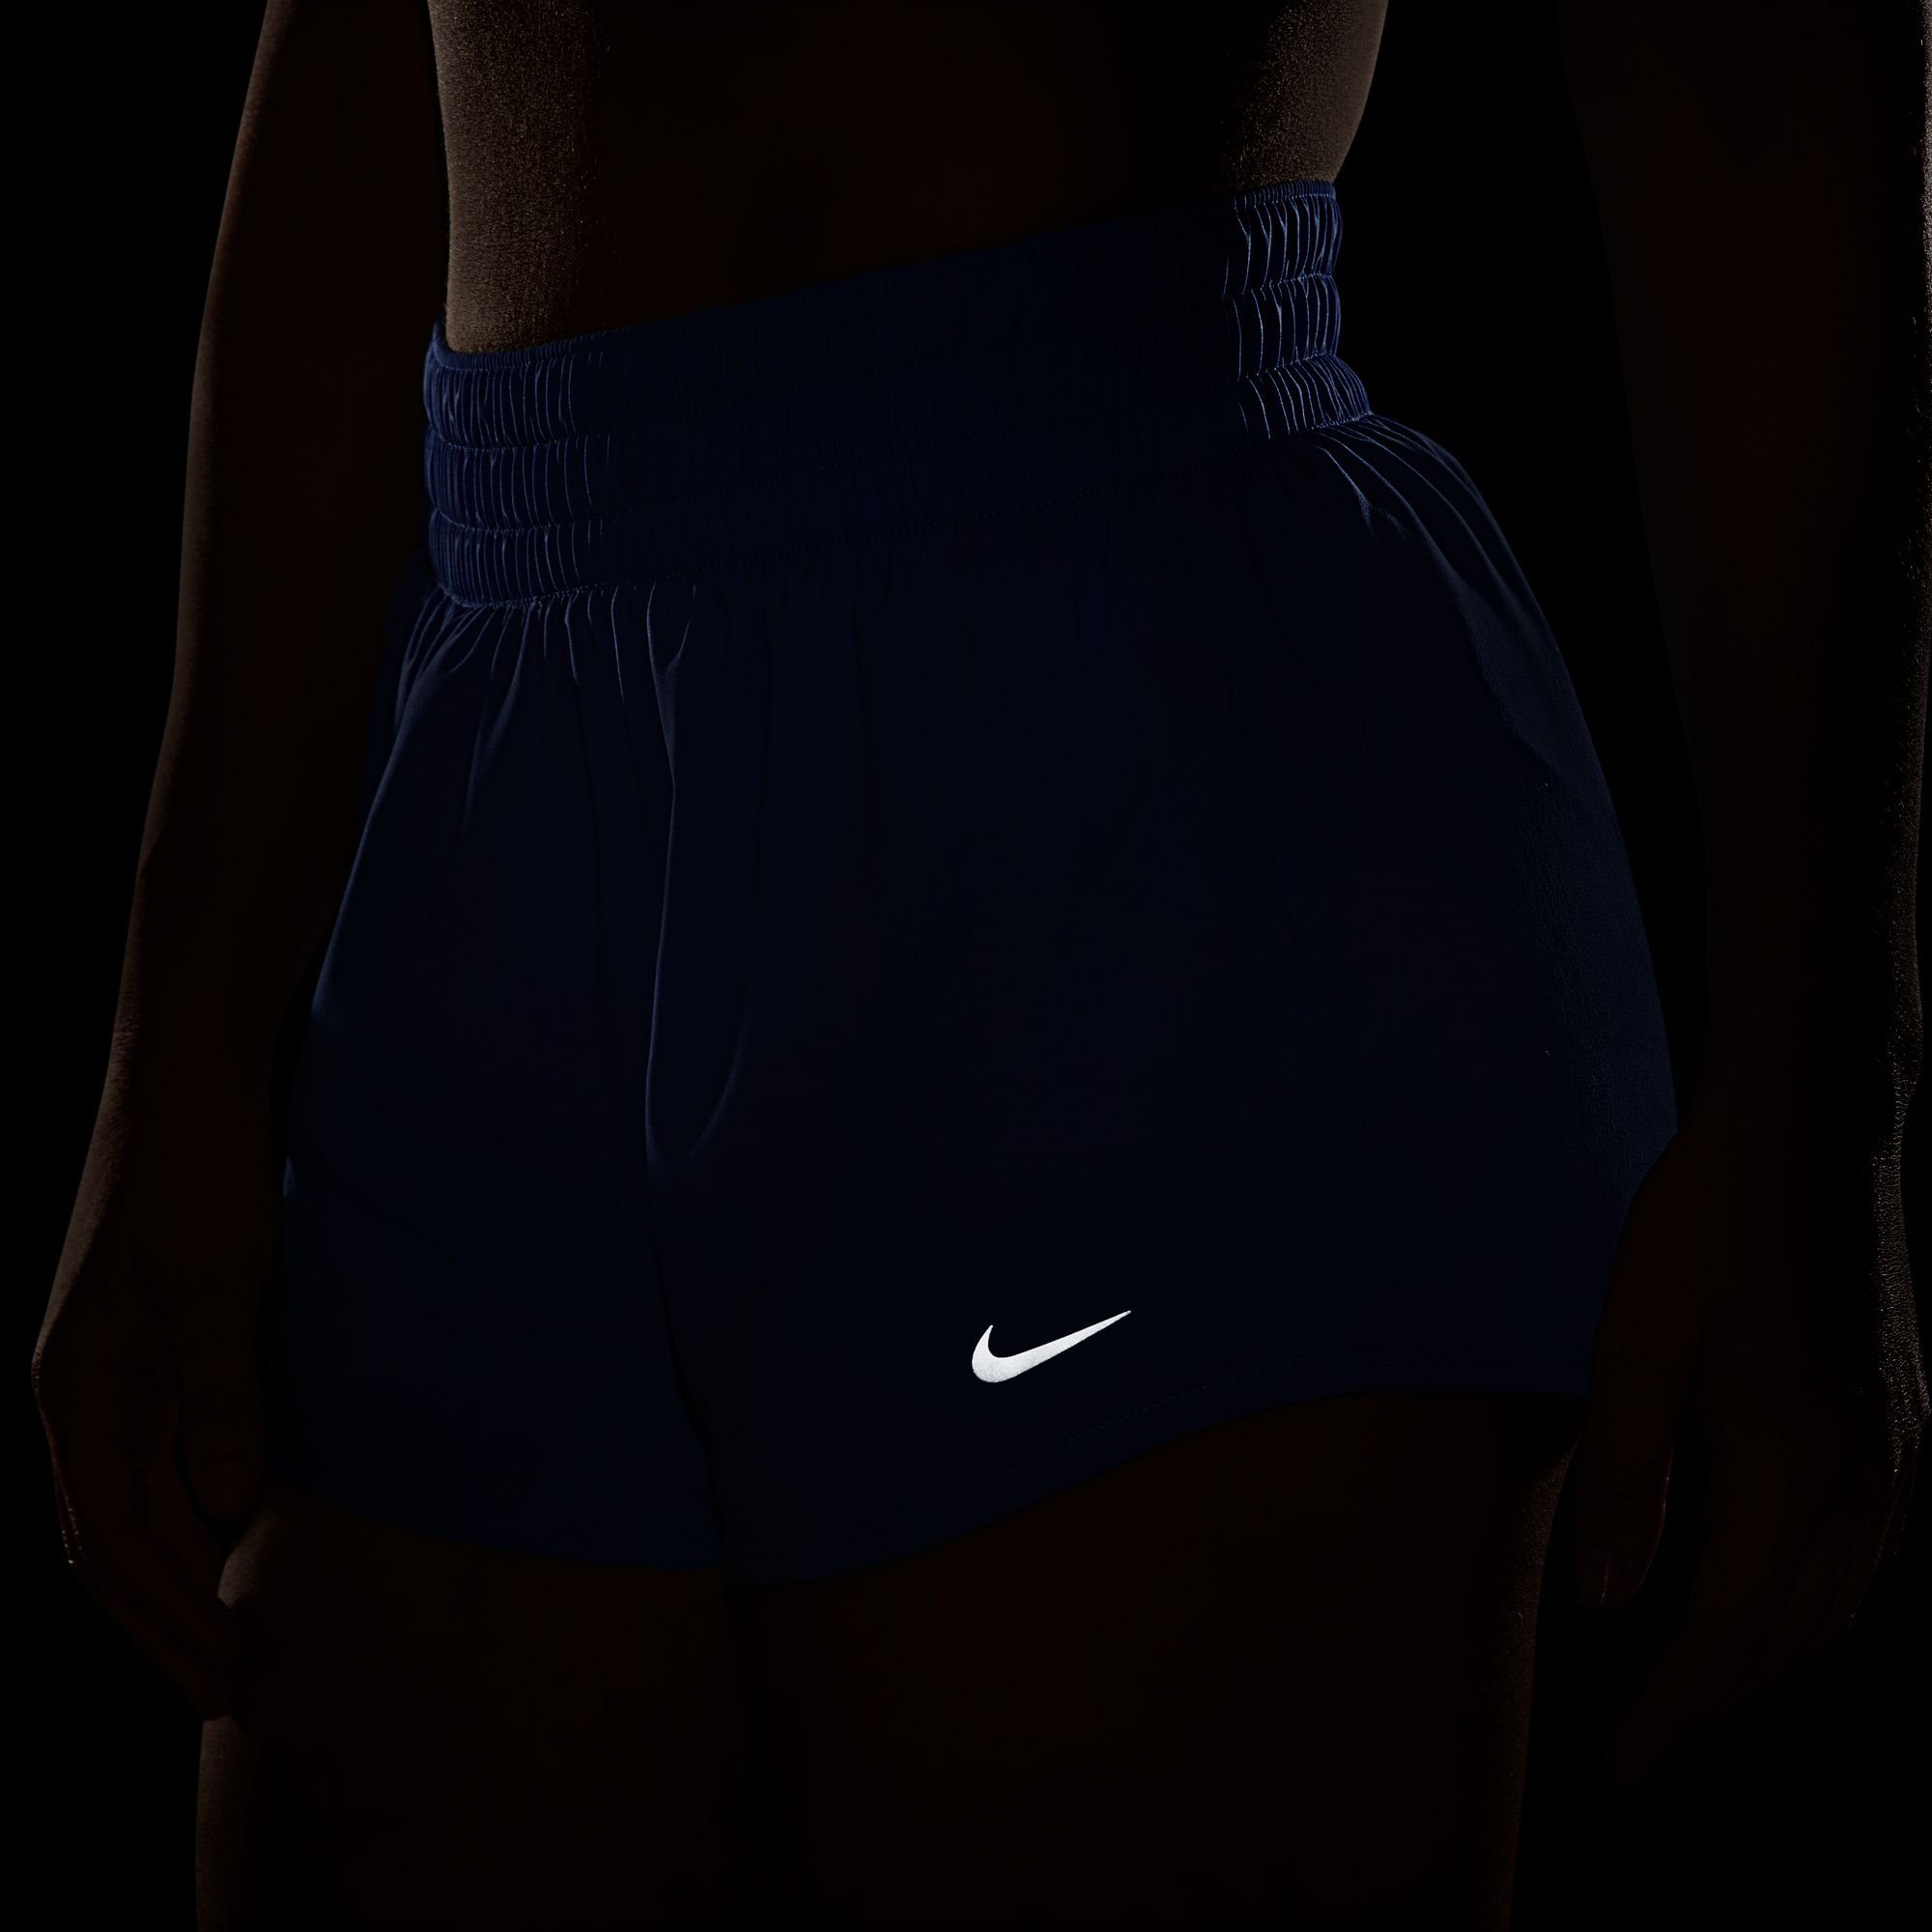 WOMEN'S MID-RISE Trainingsshorts Nike SILV POLAR/REFLECTIVE DRI-FIT BRIEF-LINED ONE SHORTS